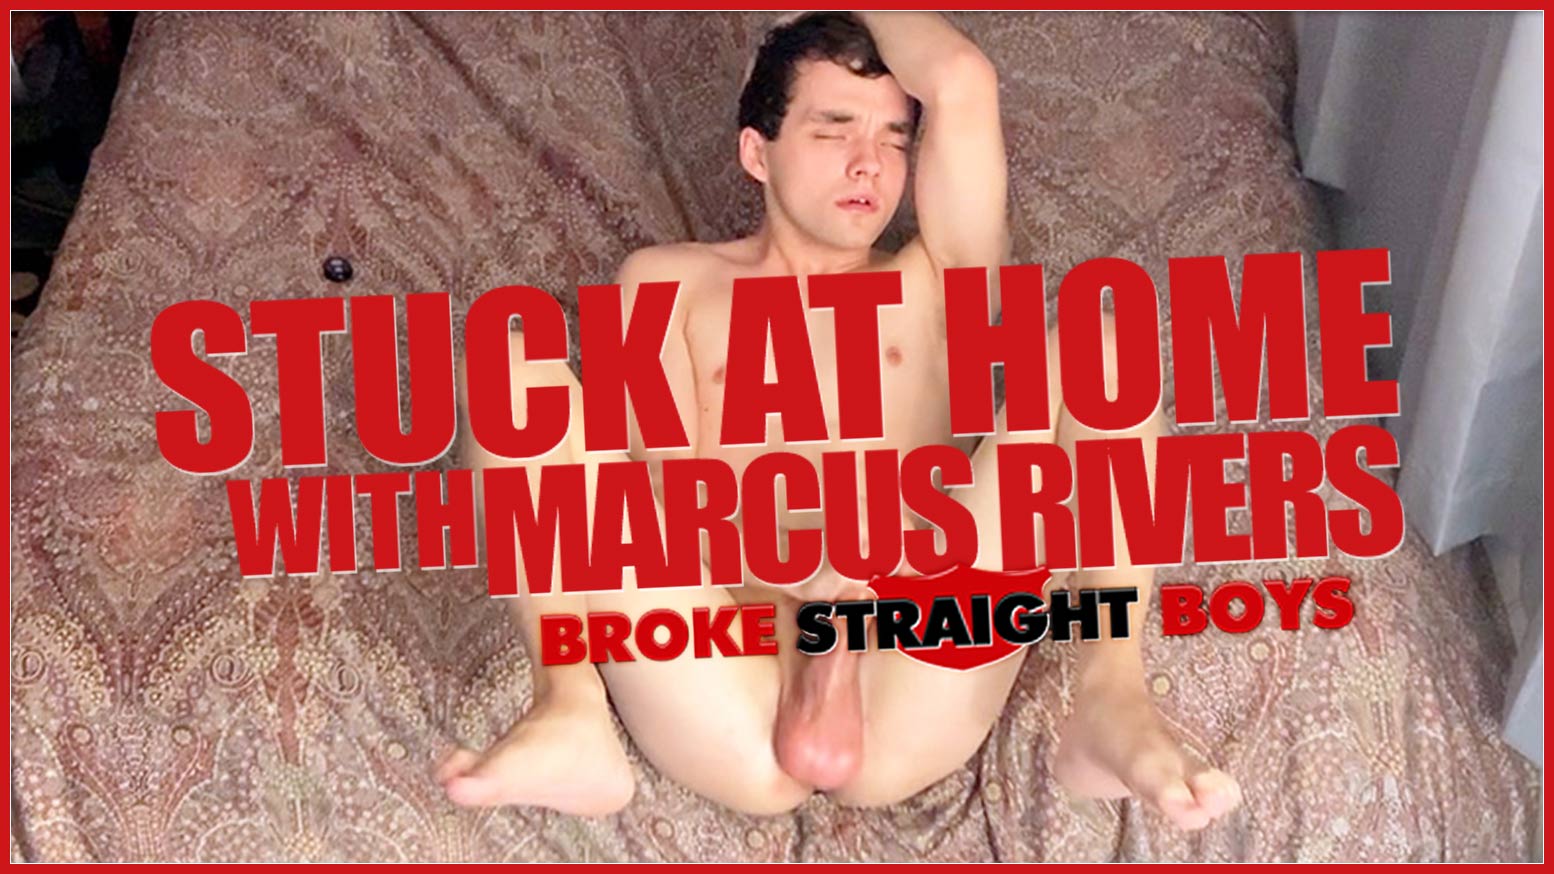 Broke Straight Boys Stuck At Home With Marcus Rivers